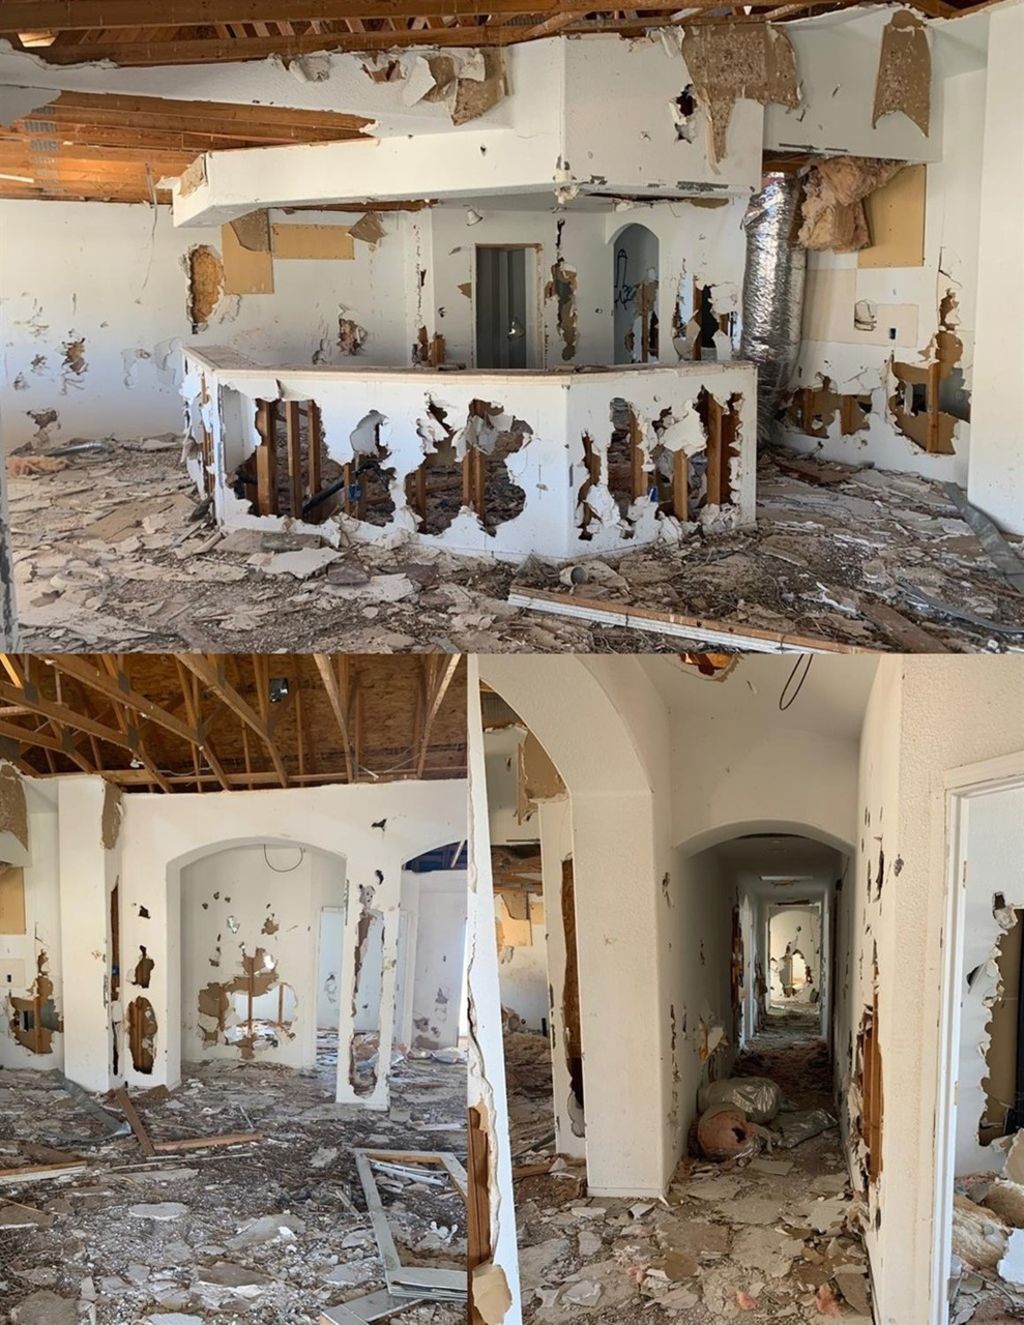 Vandals really did a number on this place. Photo: RedFin